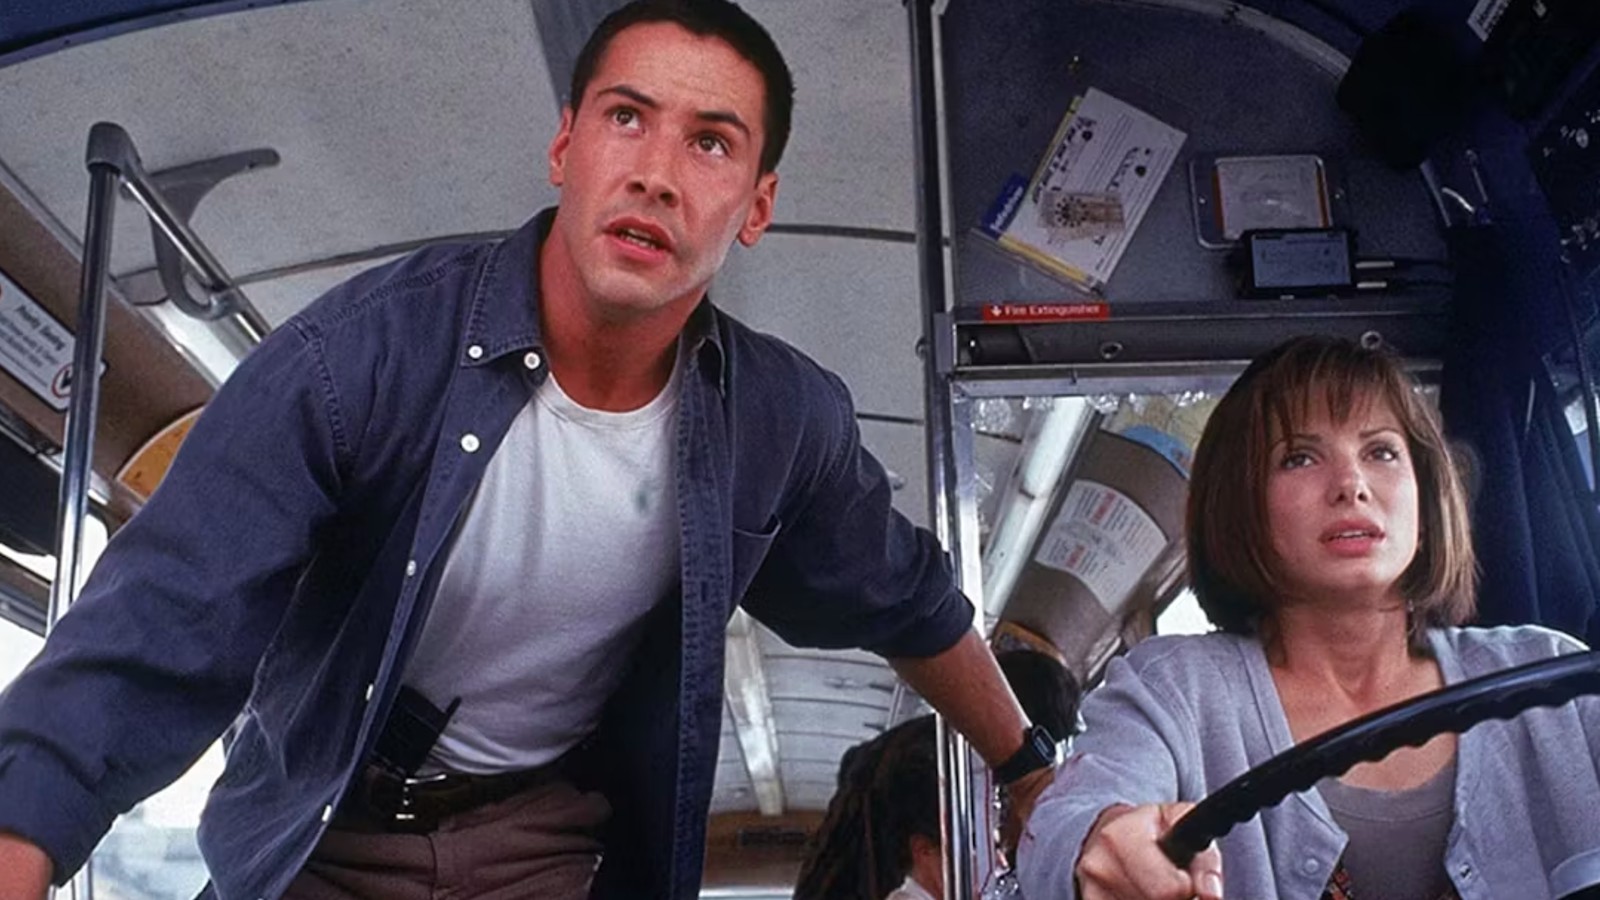 30 Years of Thrills: How 'Speed' with Keanu Reeves Still Captivates Compared to 'Die Hard'